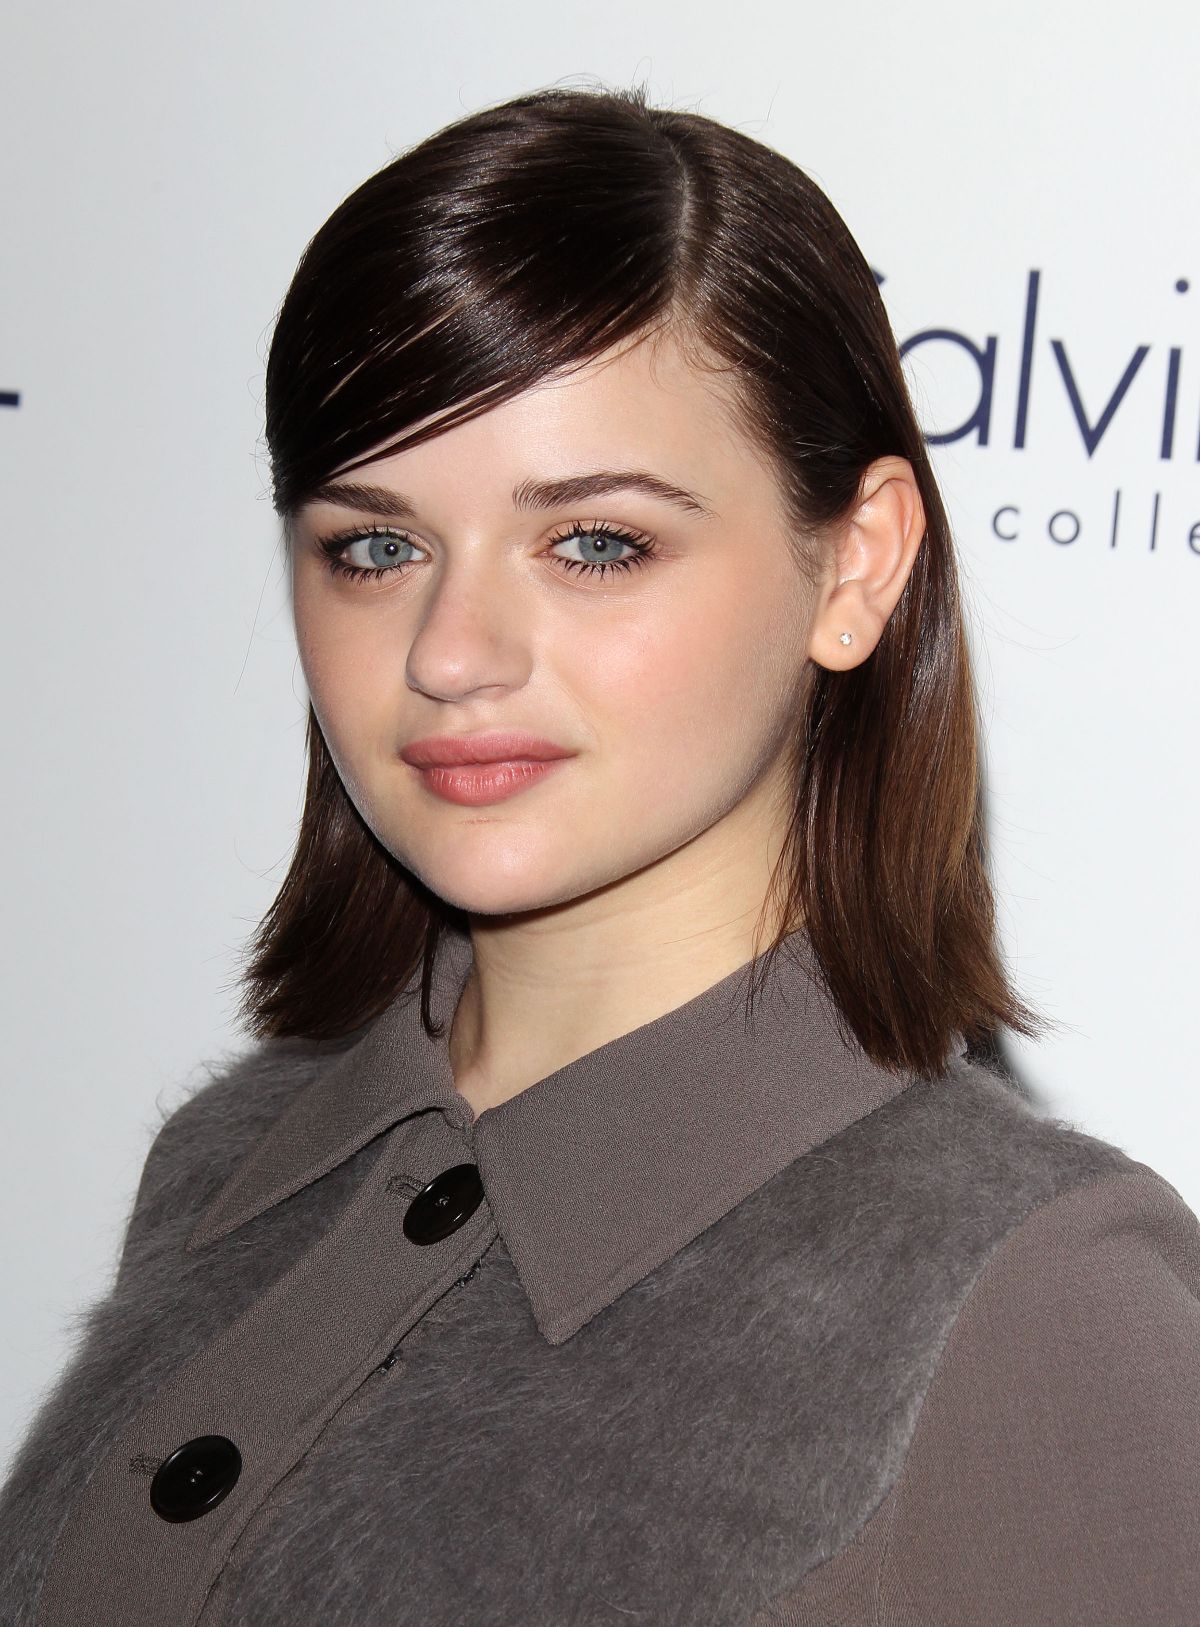 JOEY KING at 2015 Elle Women in Hollywood Awards in Los Angeles 10/19/2015.